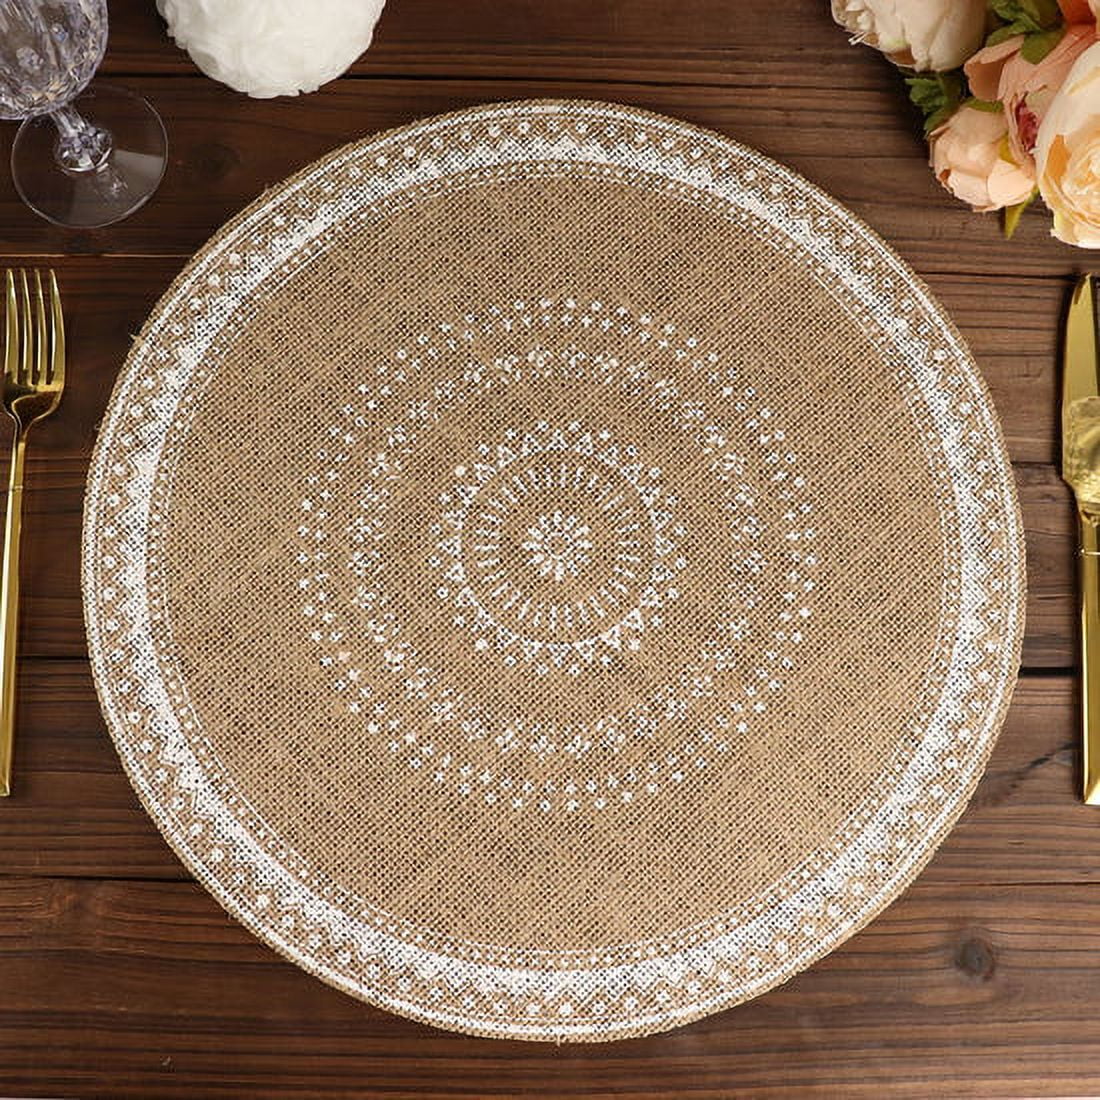 Faux Rustic Barn Wood Placemats for Round Table Tactile Basket Texture  Turned Hem Edges , Waterproof Non Slip Wipe Clean 